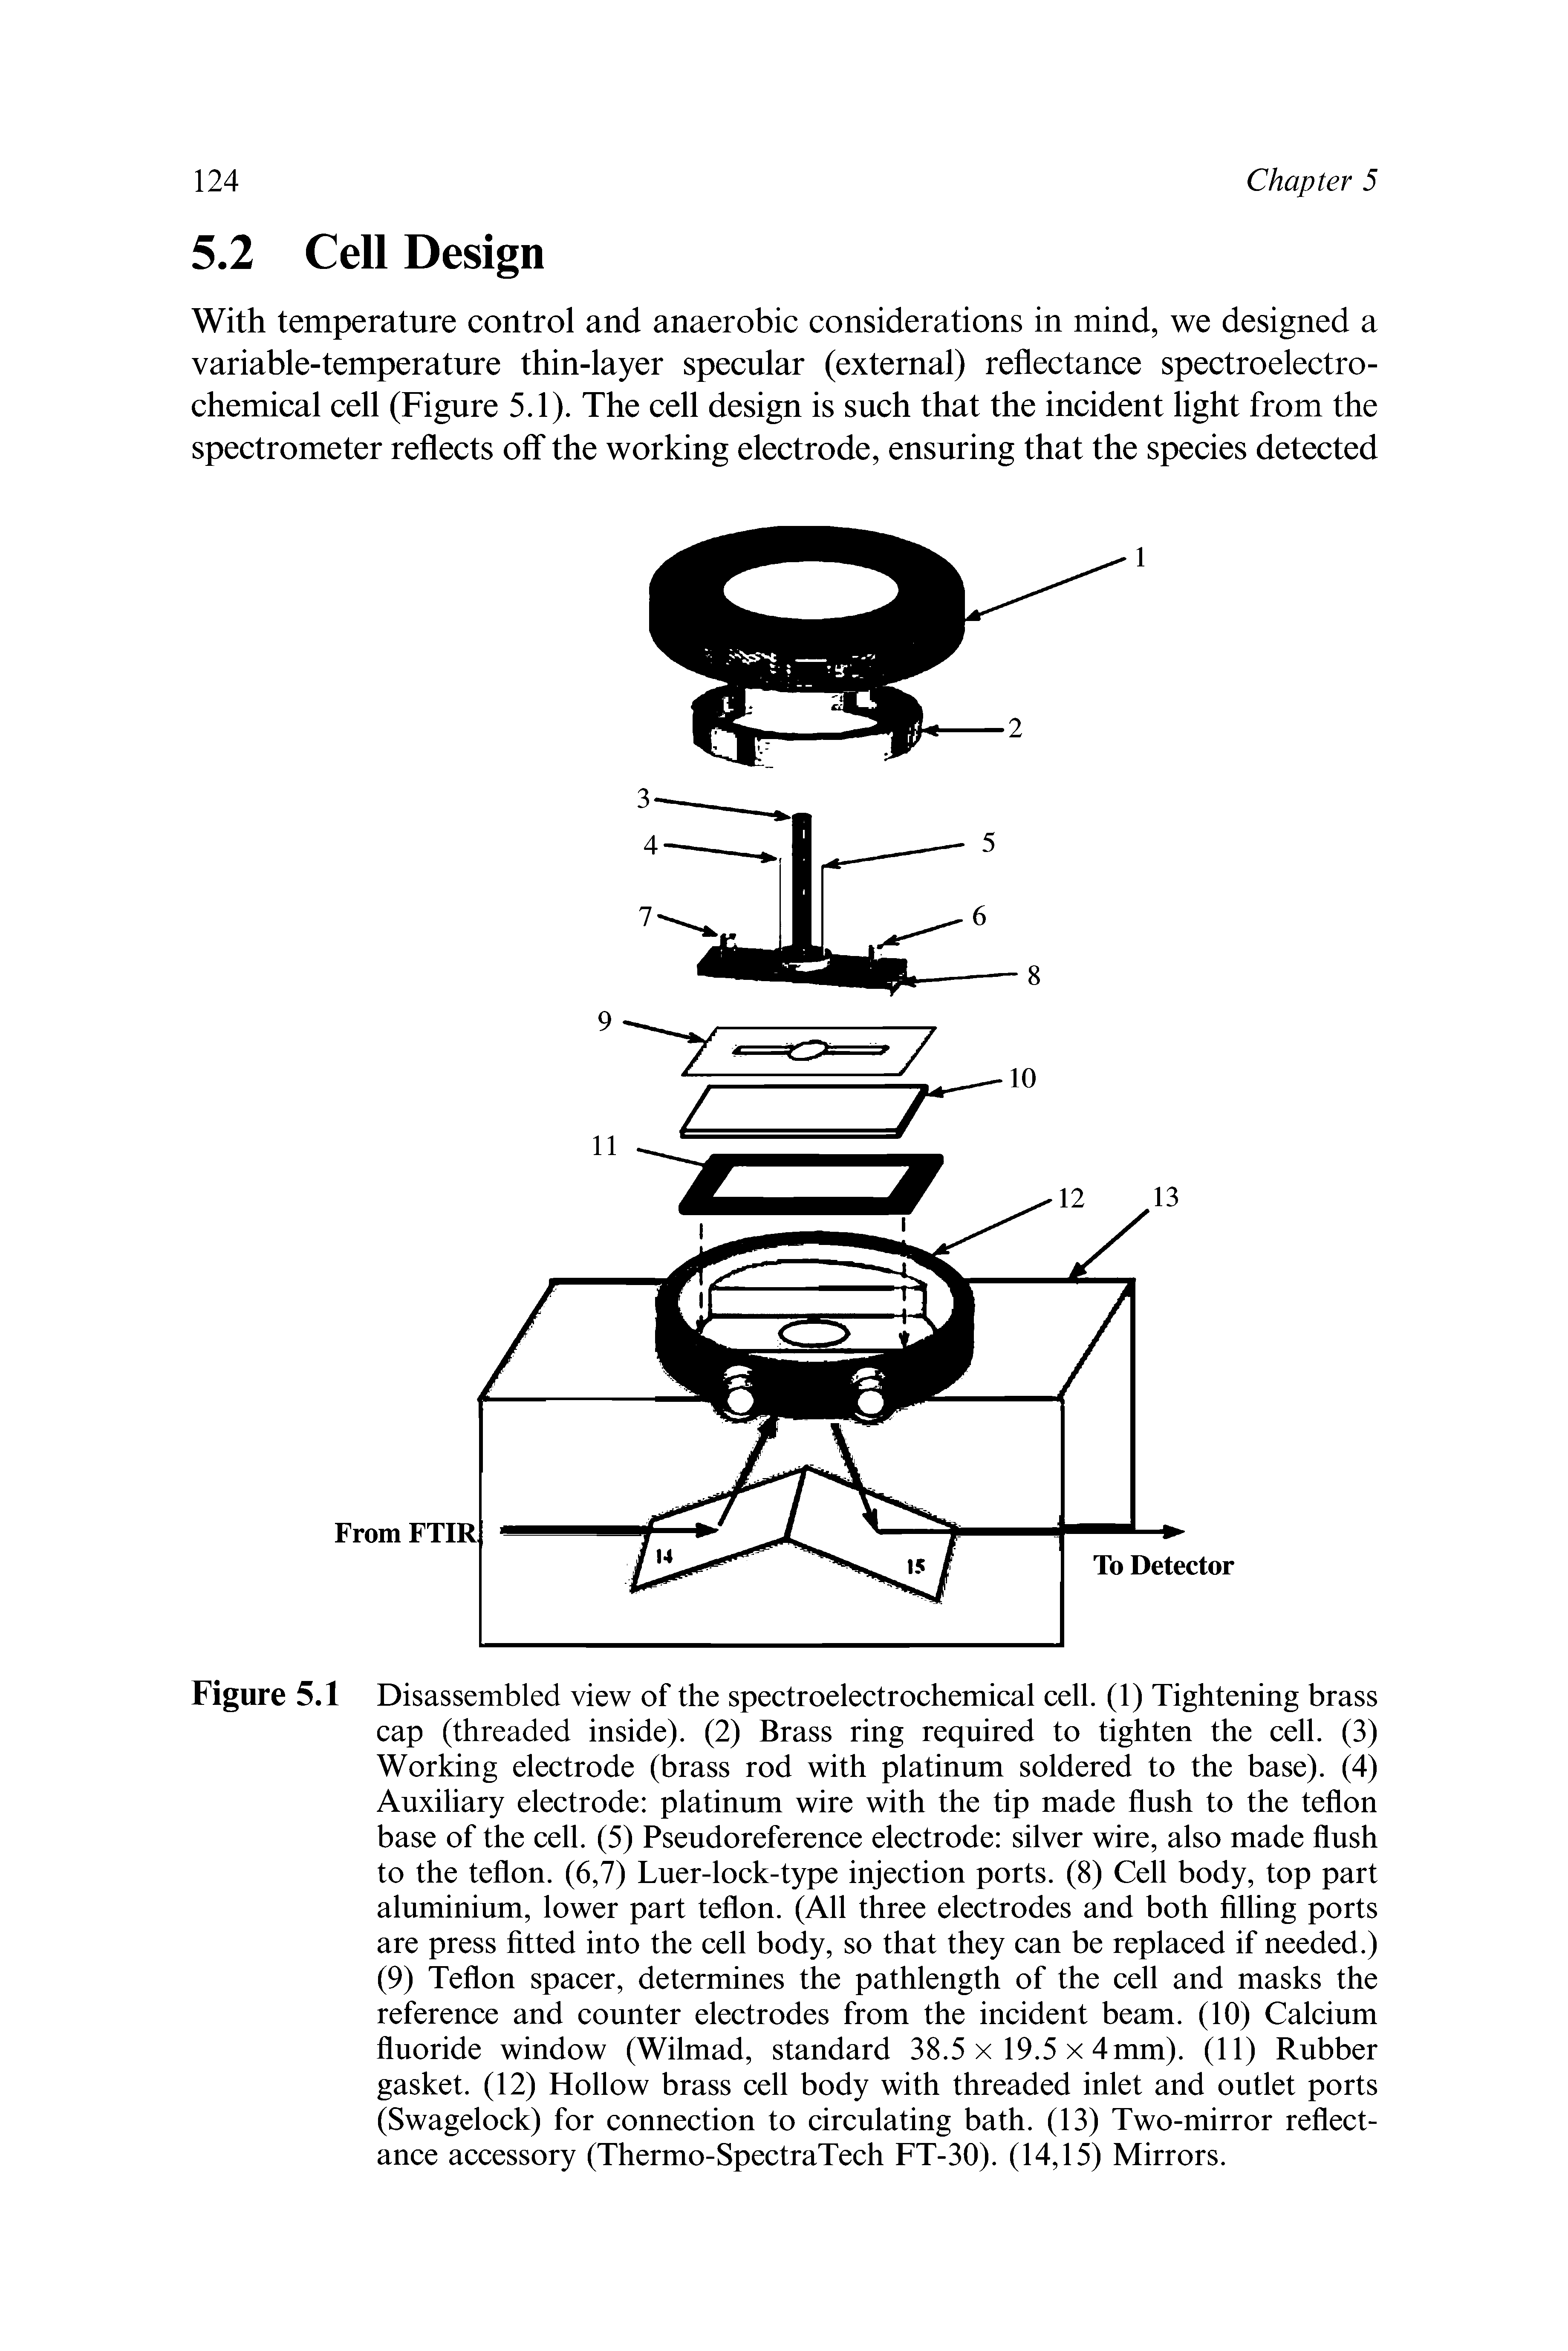 Figure 5.1 Disassembled view of the spectroelectrochemical cell. (1) Tightening brass cap (threaded inside). (2) Brass ring required to tighten the cell. (3) Working electrode (brass rod with platinum soldered to the base). (4) Auxiliary electrode platinum wire with the tip made flush to the teflon base of the cell. (5) Pseudoreference electrode silver wire, also made flush to the teflon. (6,7) Luer-lock-type injection ports. (8) Cell body, top part aluminium, lower part teflon. (All three electrodes and both filling ports are press fitted into the cell body, so that they can be replaced if needed.) (9) Teflon spacer, determines the pathlength of the cell and masks the reference and counter electrodes from the incident beam. (10) Calcium fluoride window (Wilmad, standard 38.5 x 19.5 x 4mm). (11) Rubber gasket. (12) Hollow brass cell body with threaded inlet and outlet ports (Swagelock) for connection to circulating bath. (13) Two-mirror reflectance accessory (Thermo-SpectraTech FT-30). (14,15) Mirrors.